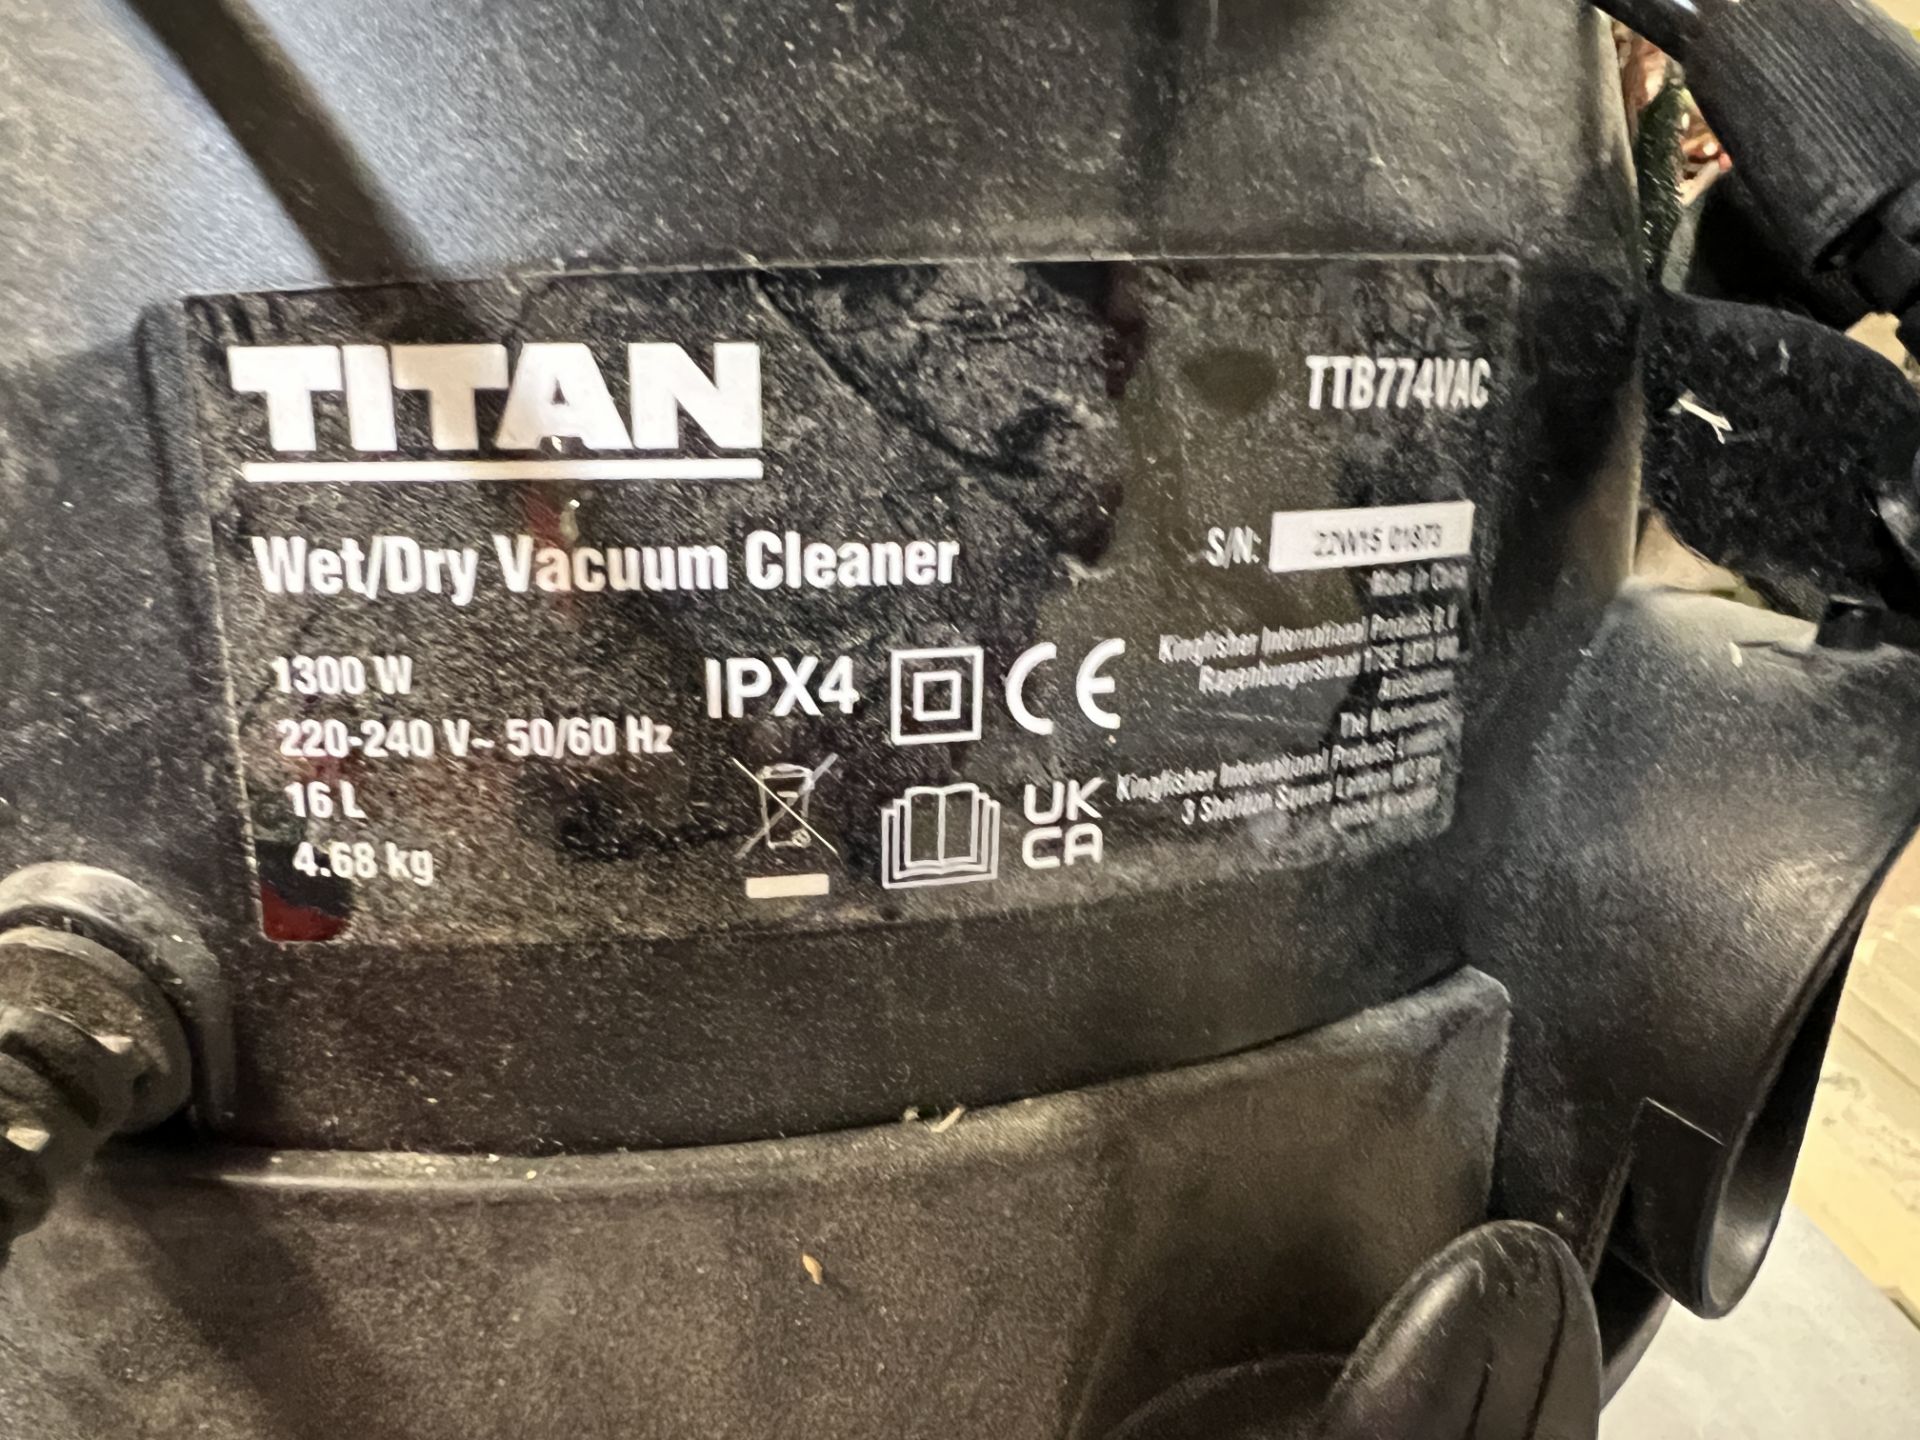 Titan TTB774VAC wet and dry 16 Lts vacuum cleaner, 220-240 volts, S/No. 22W1501873, location Manor - Image 3 of 4